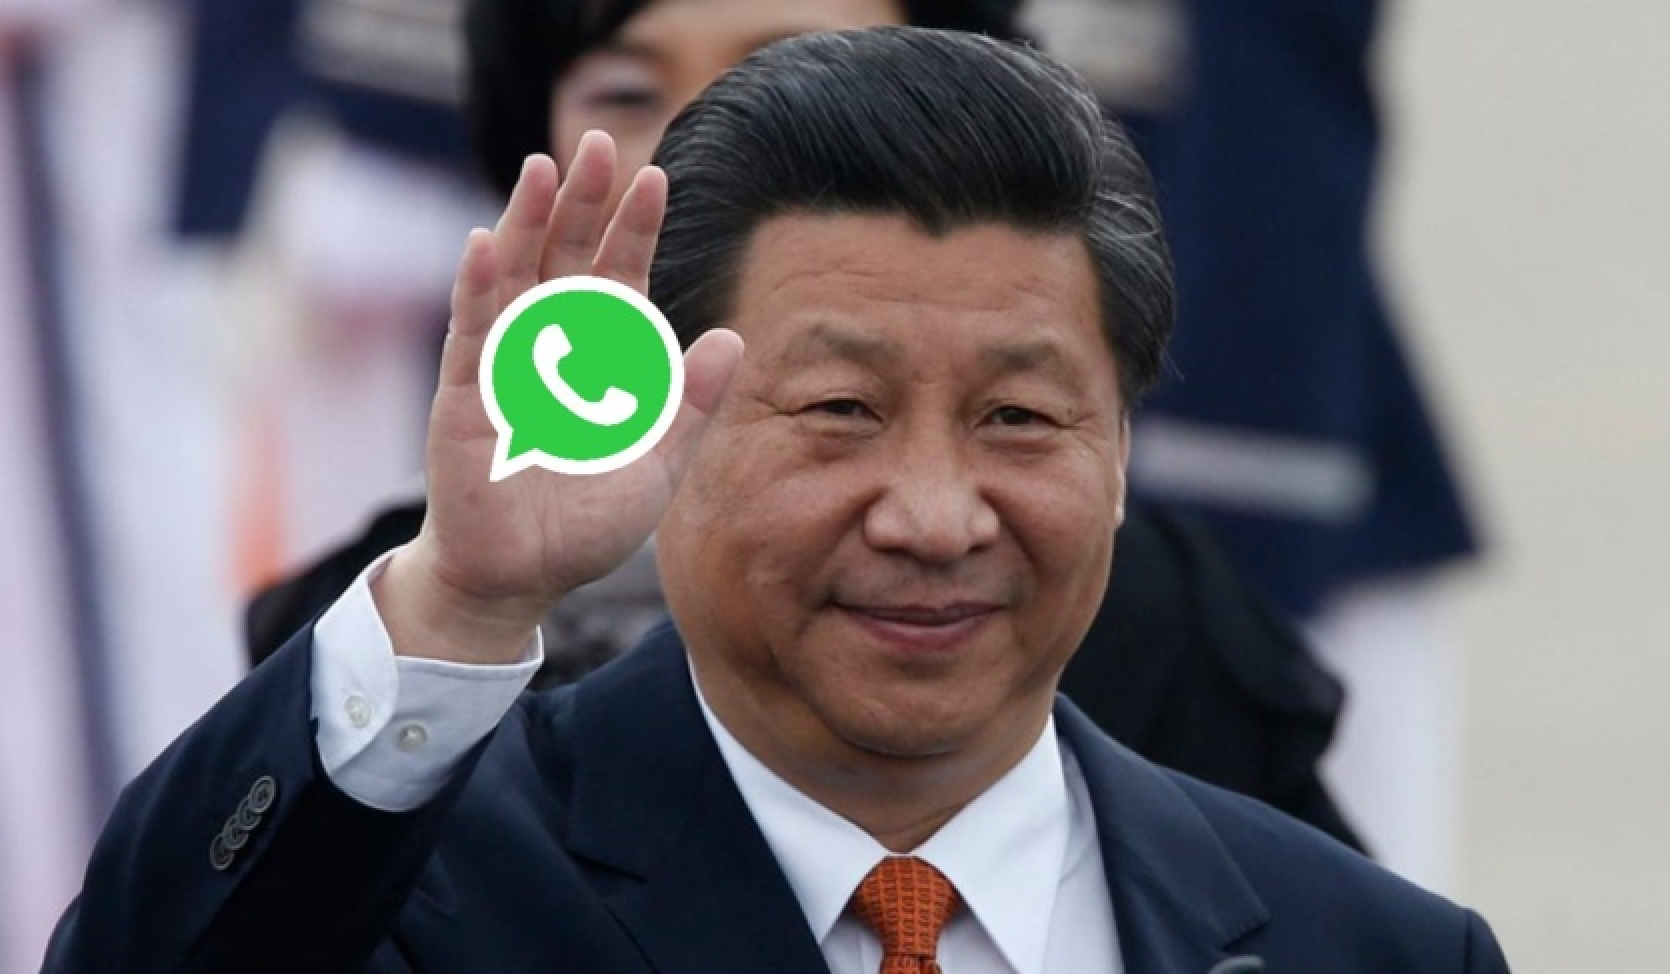 Without VPN and government authorization: banned WhatsApp suddenly works in China